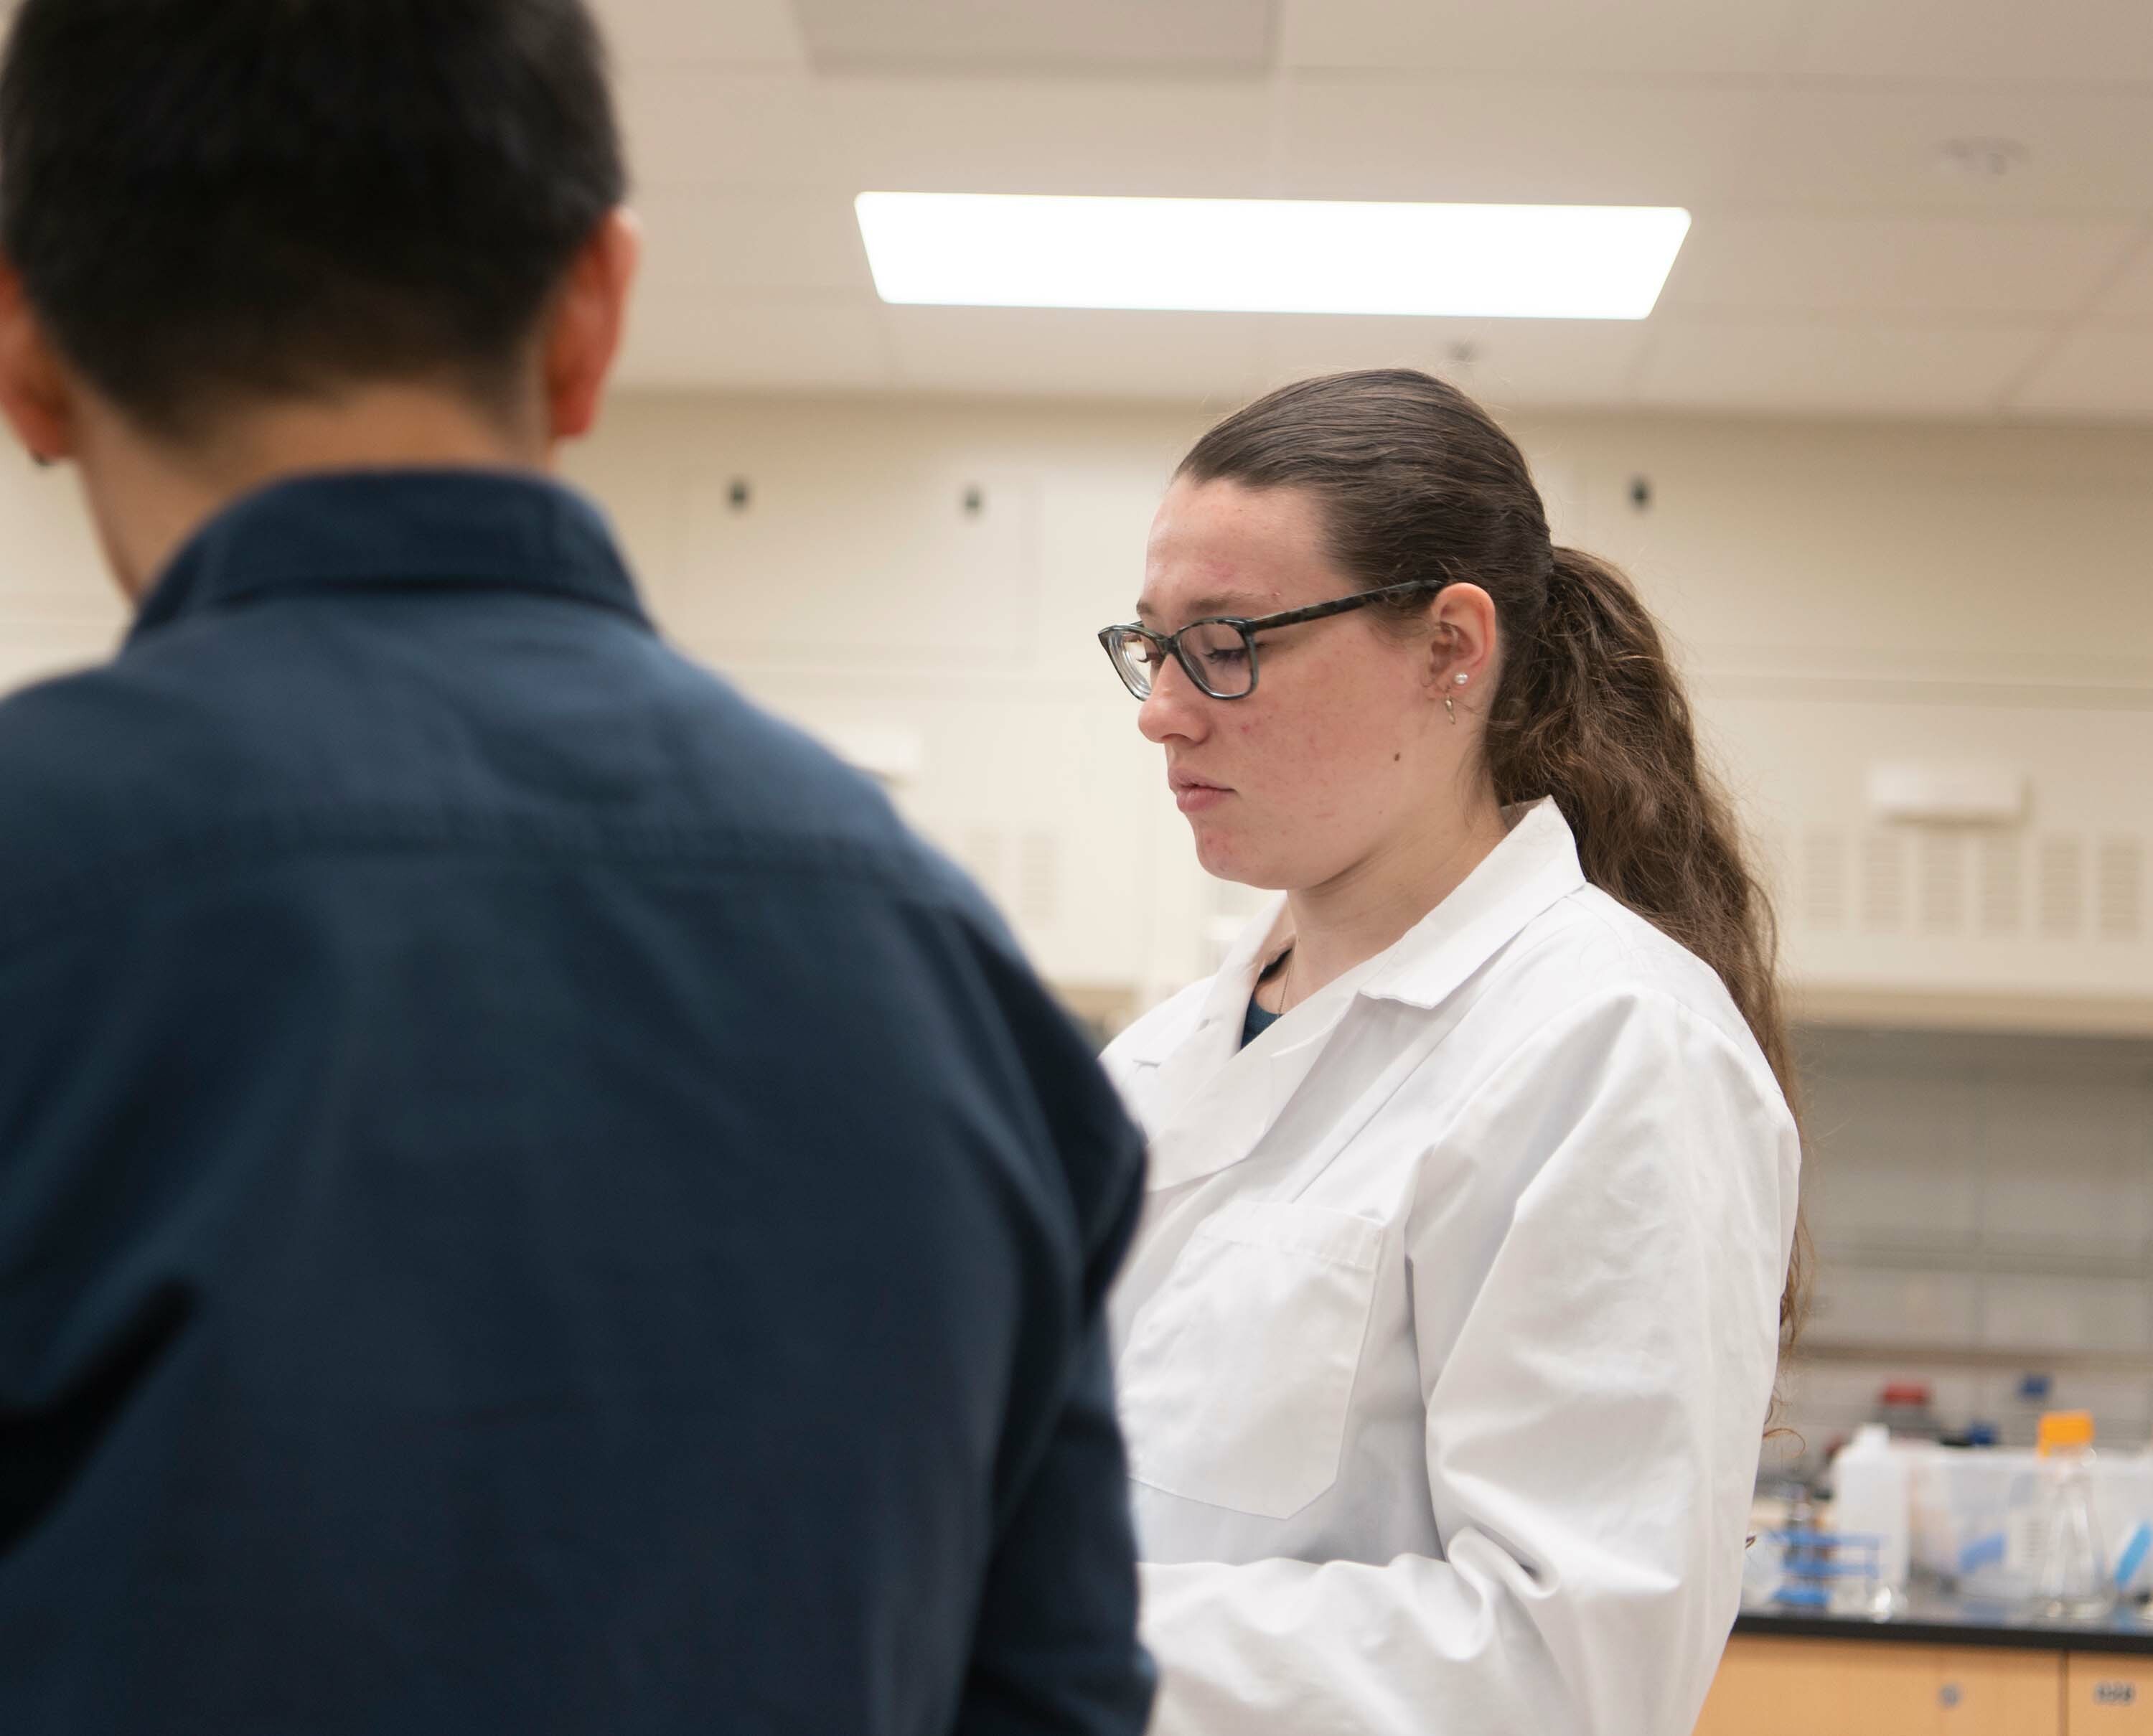 A student in a lab coat interacts with a professor in a lab